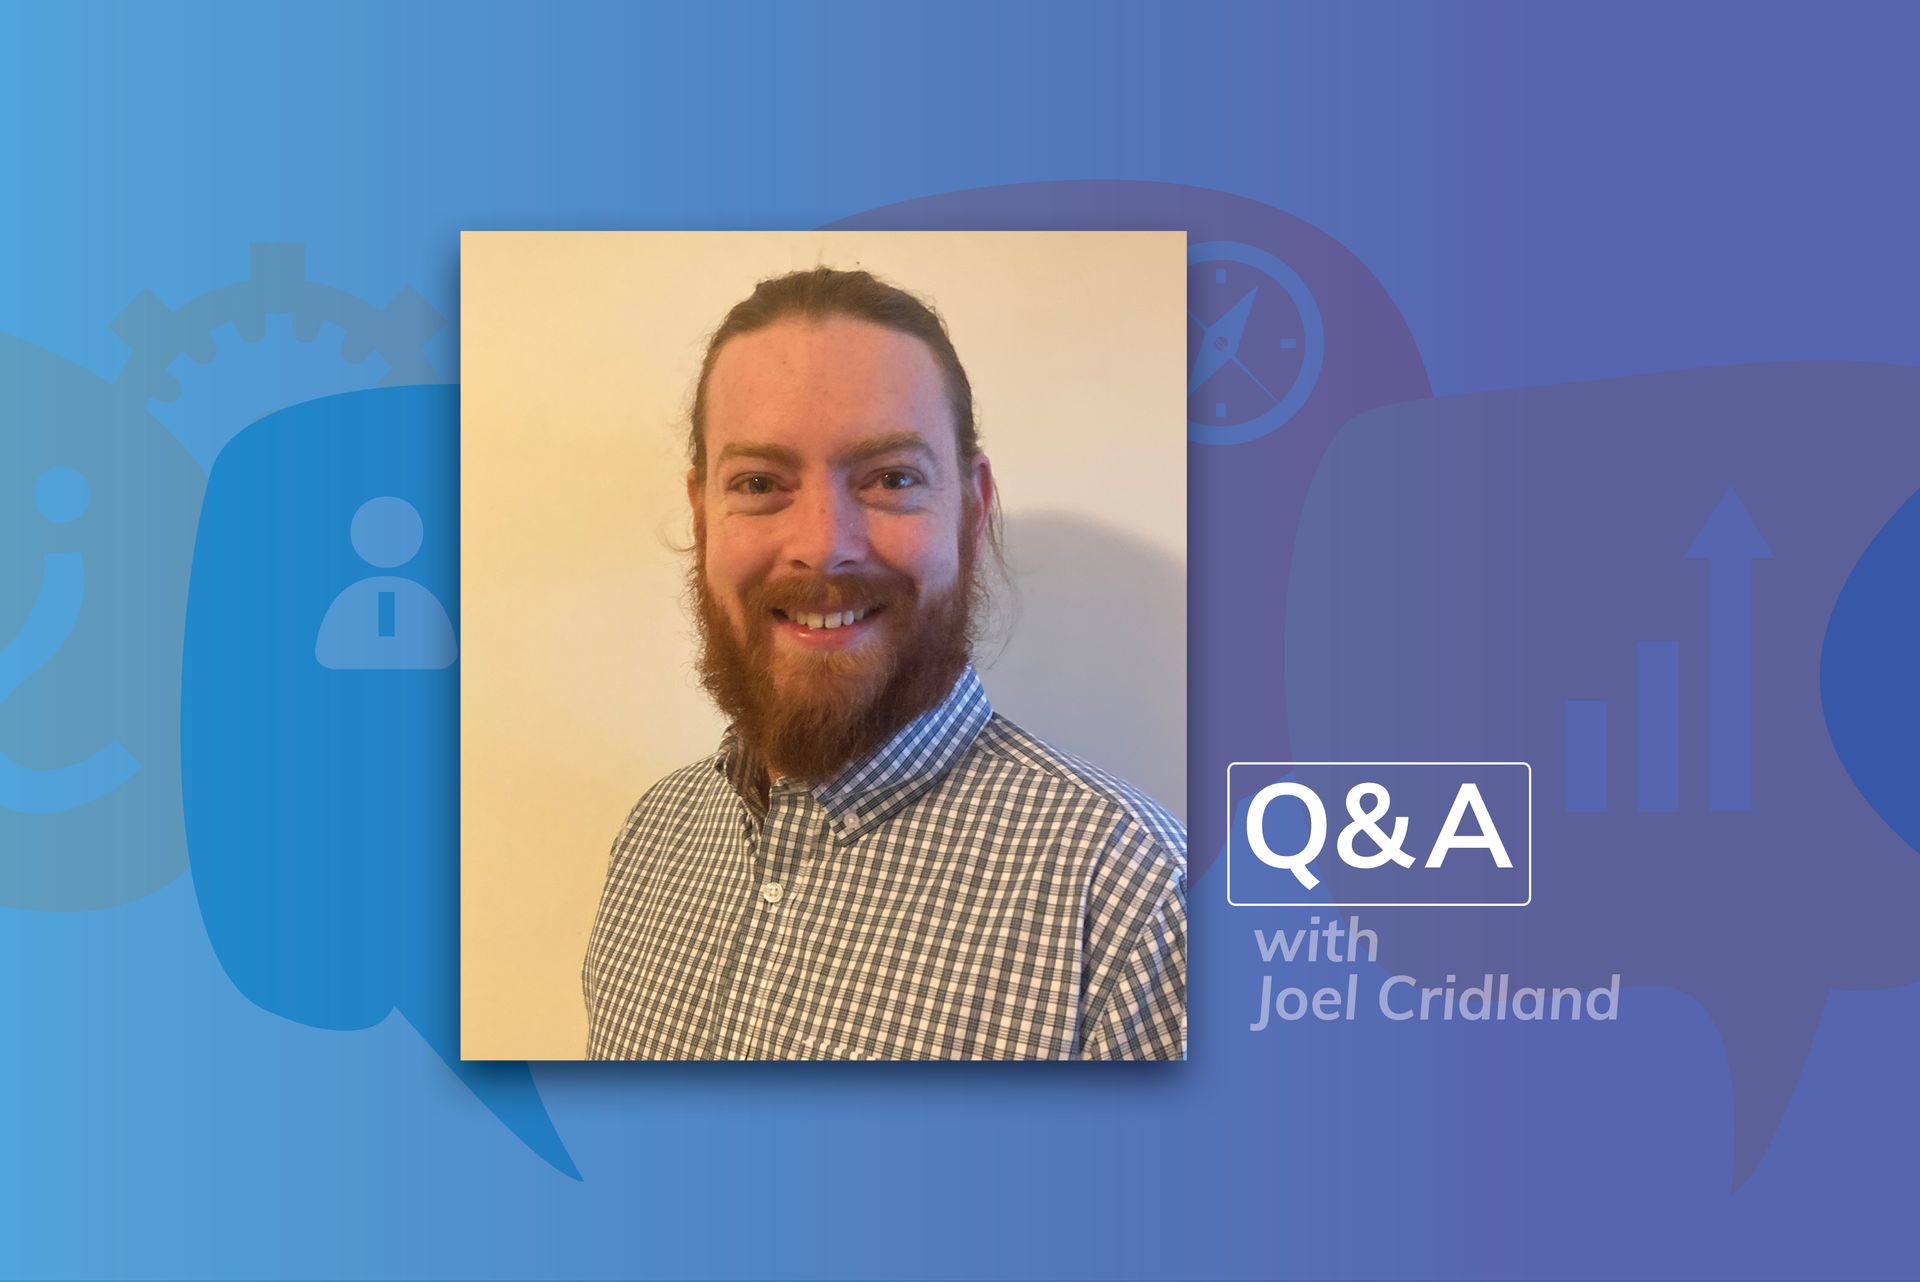 Joel Cridland, specialist scientific recruiter, answers our questions